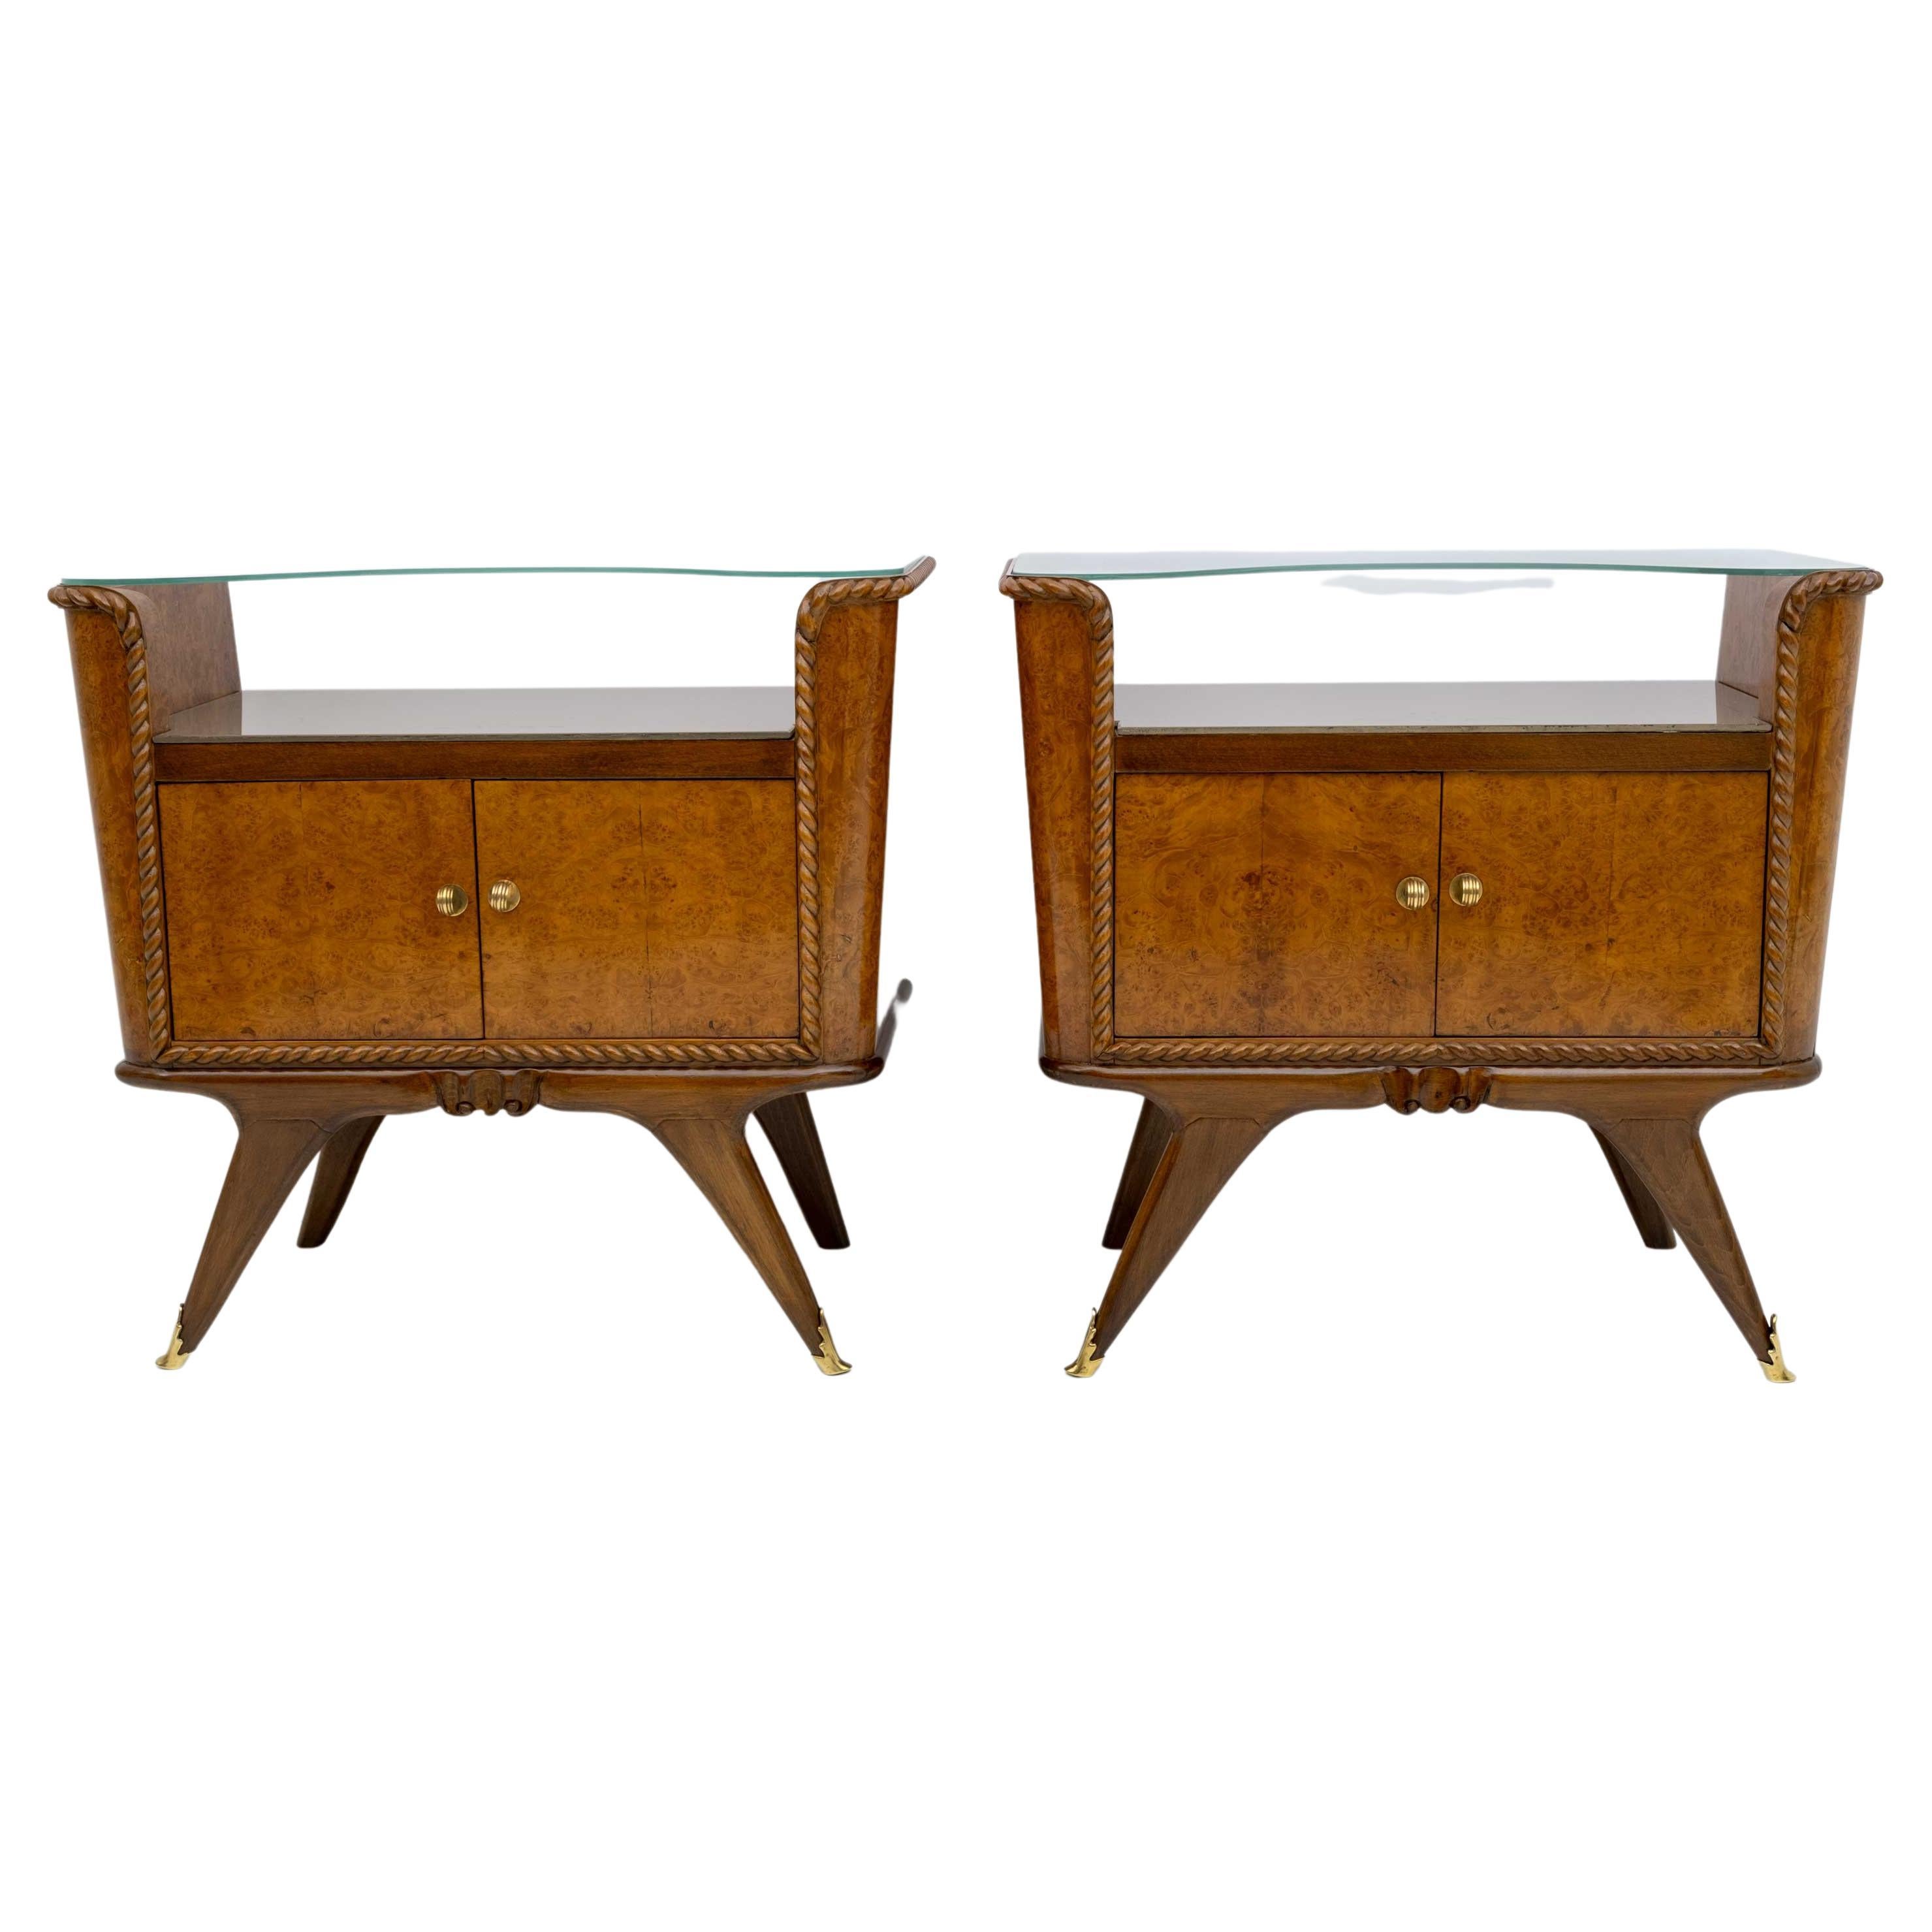 Pair of Art Deco Italian Briar Walnut Bedside Tables, 1930s For Sale